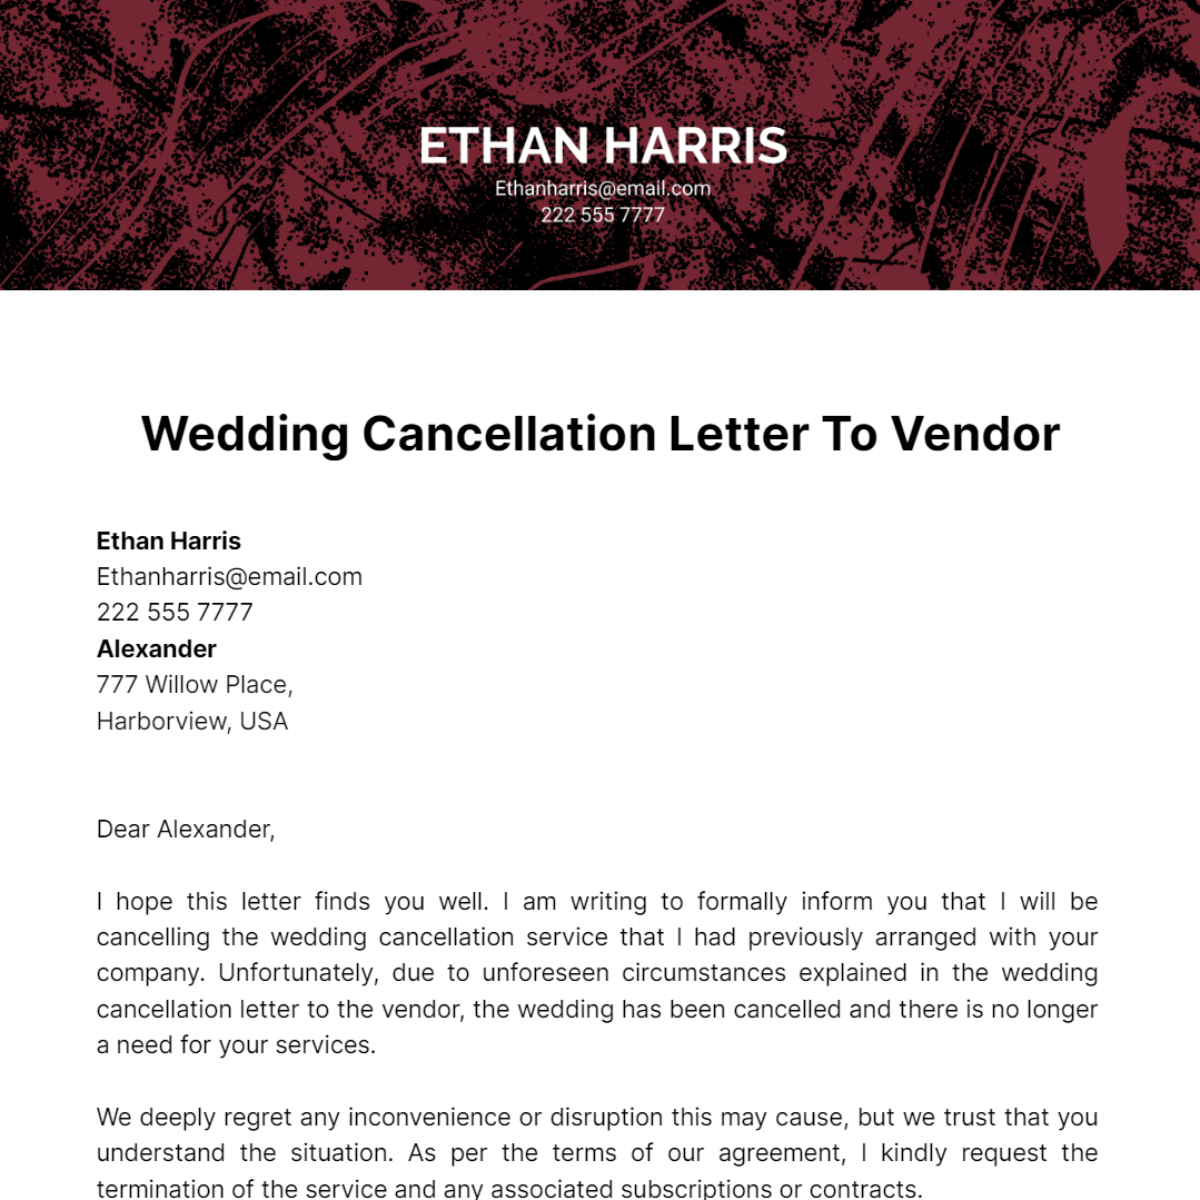 Wedding Cancellation Letter To Vendor Template